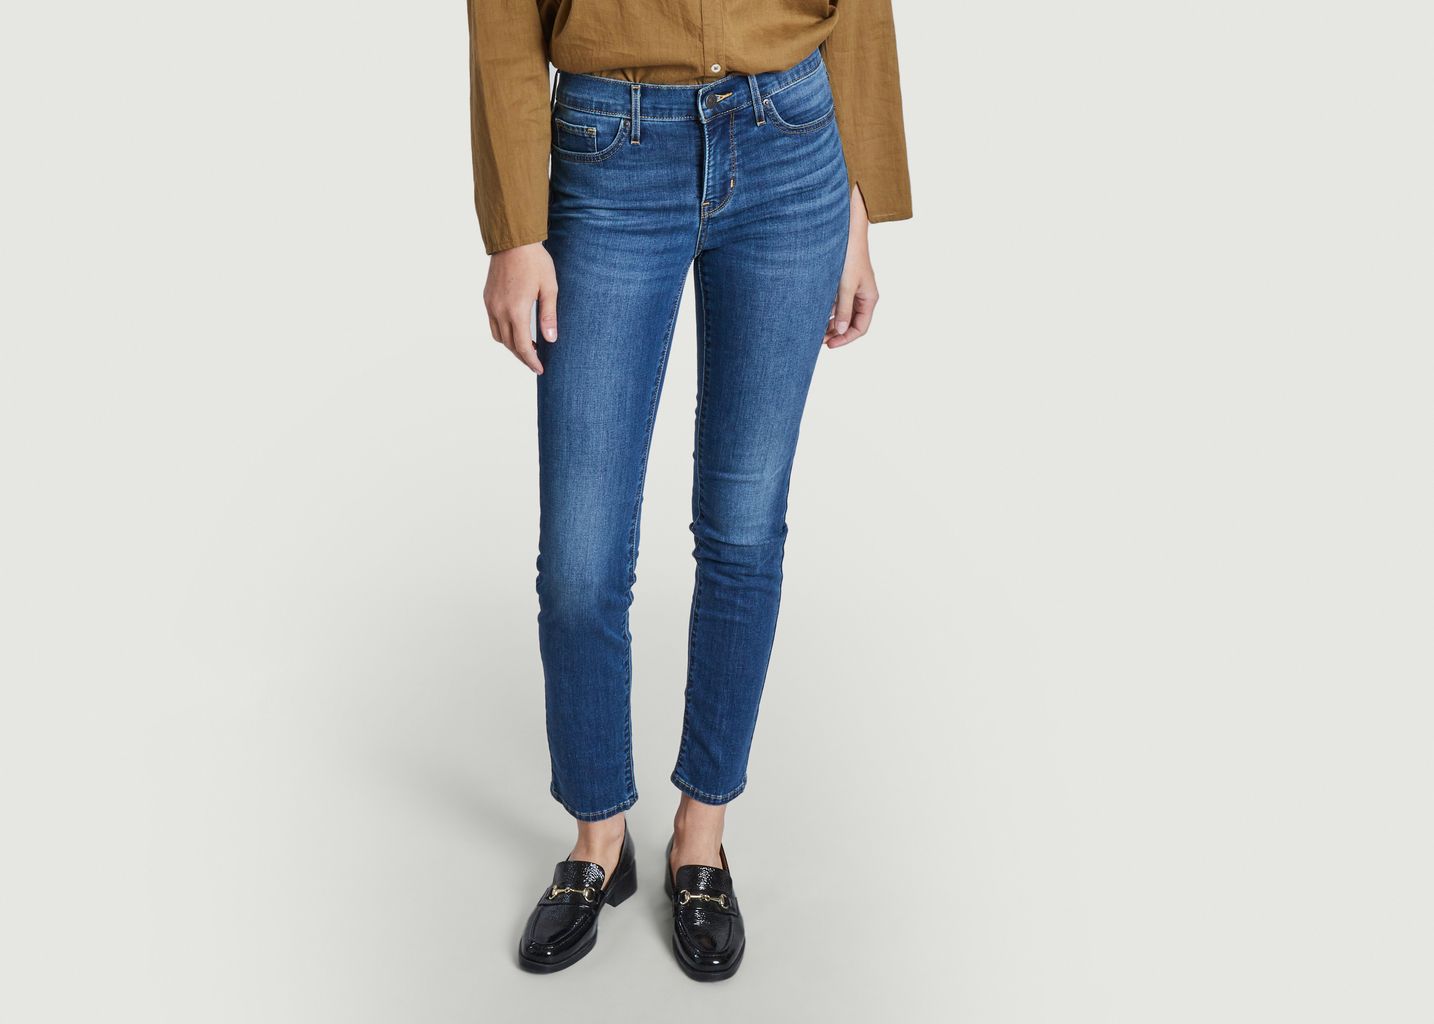 312 Shaping slim jeans  - Levi's Red Tab